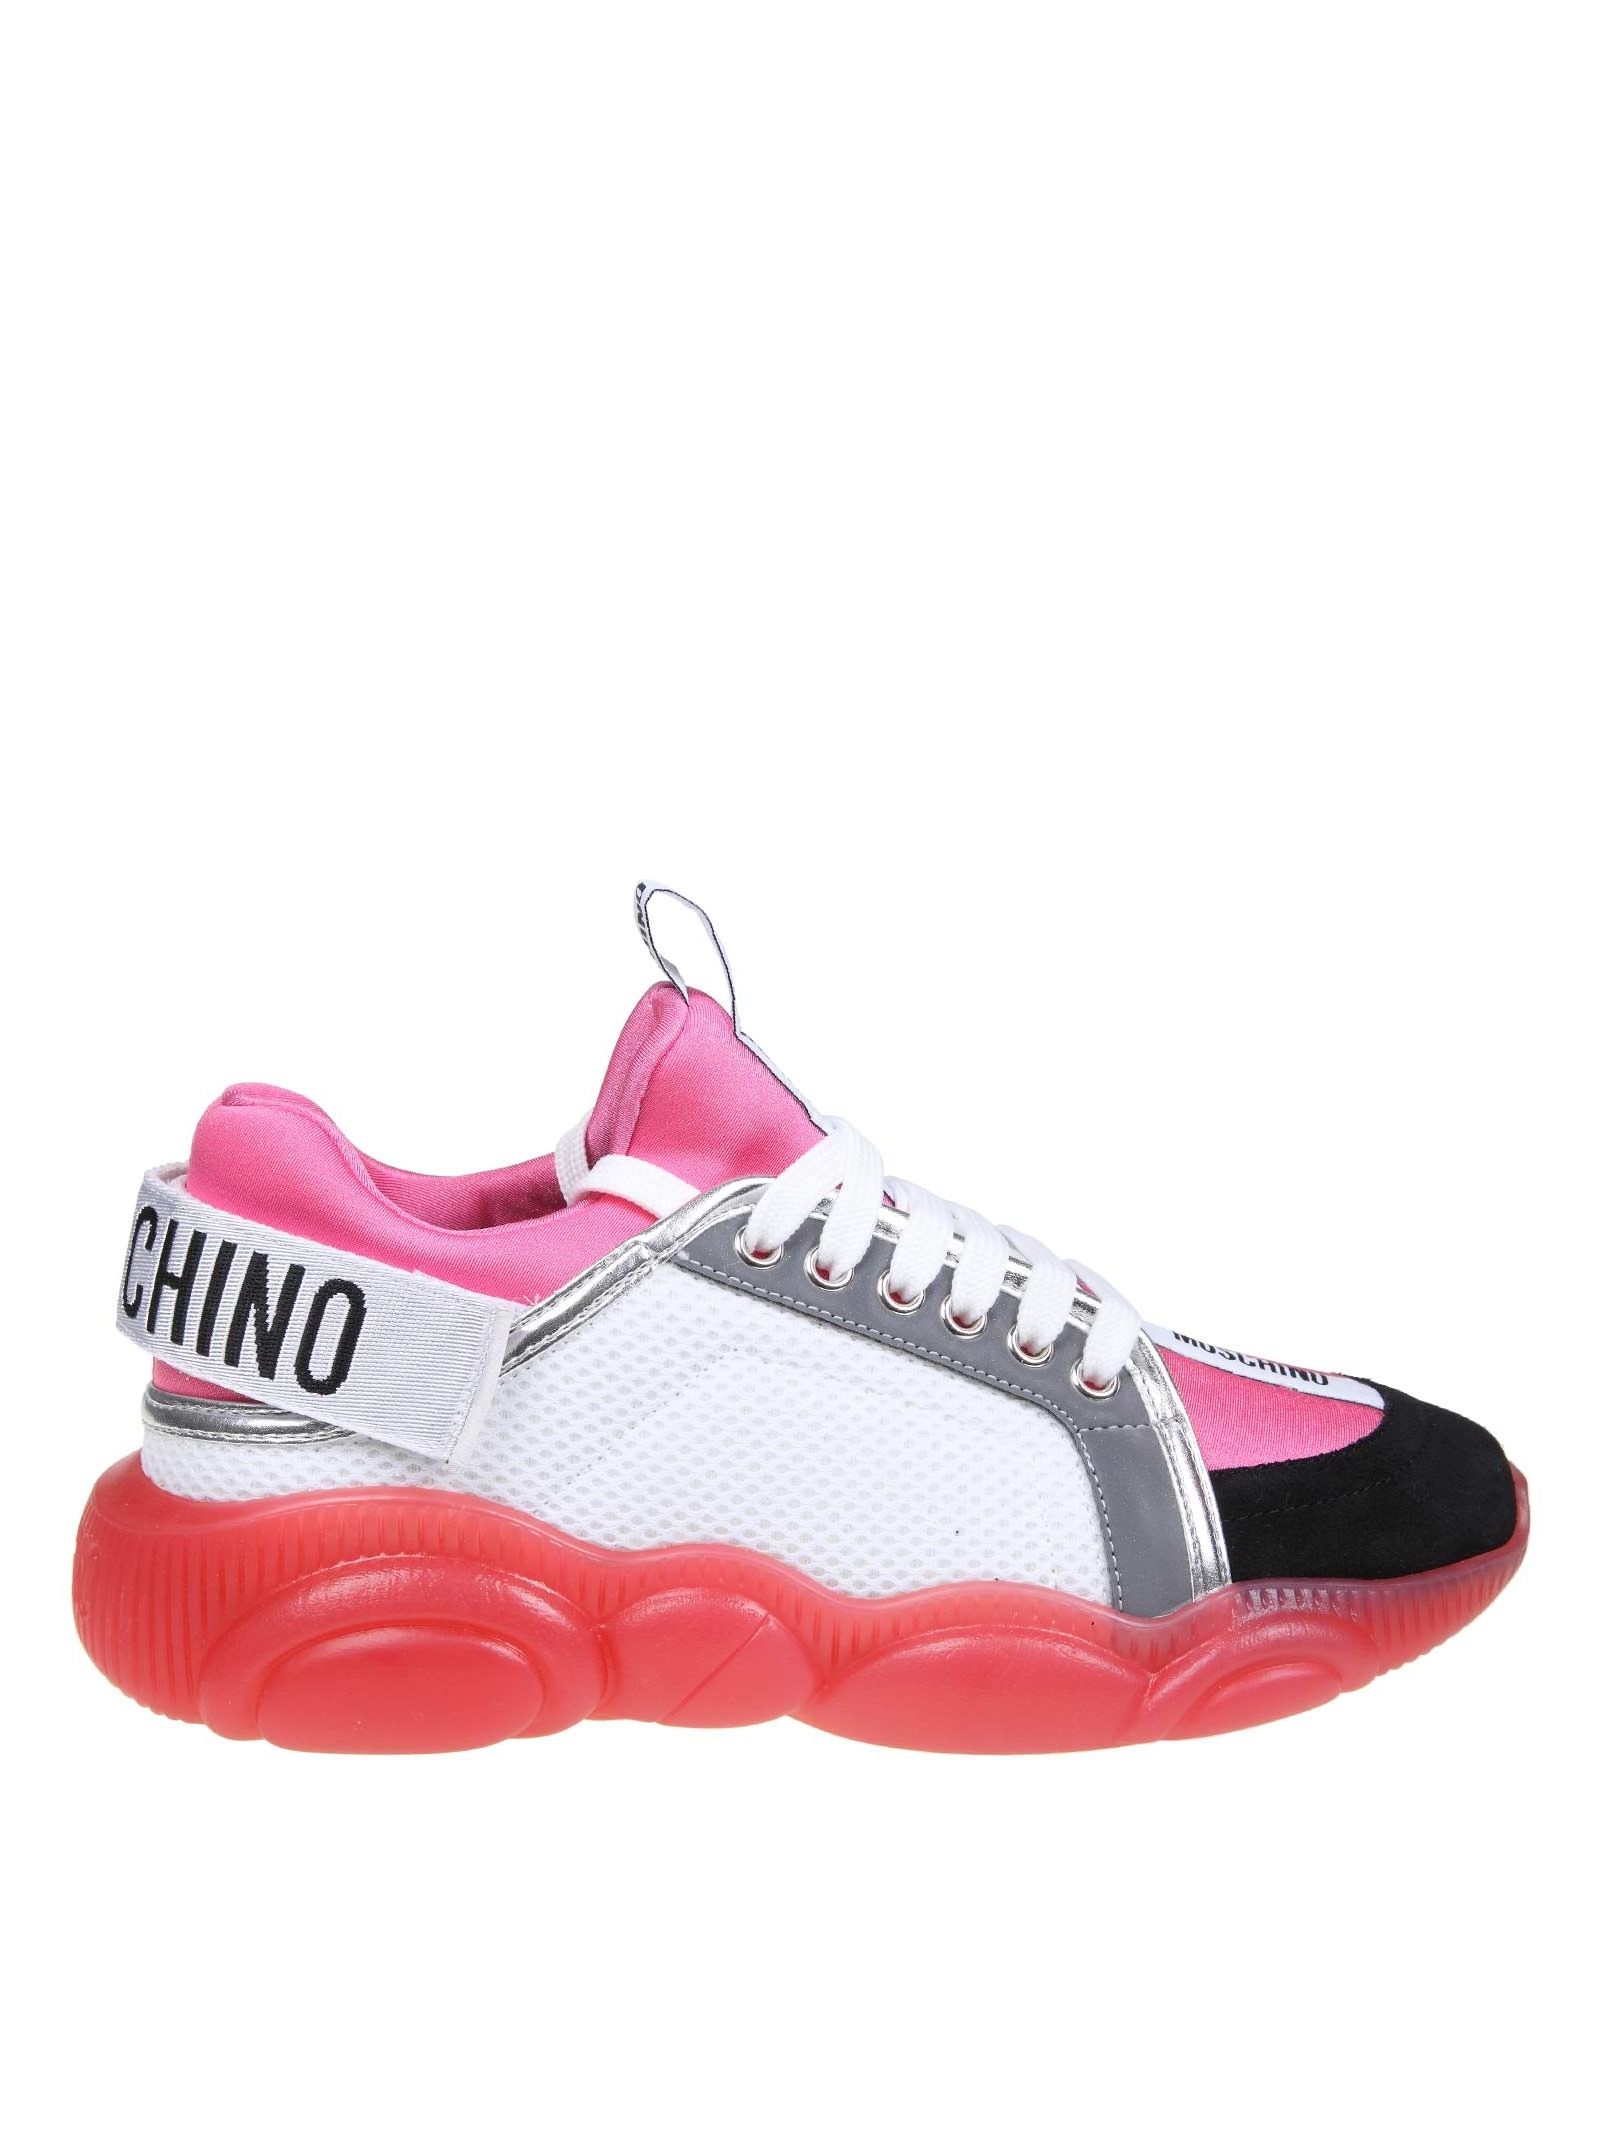 MOSCHINO SNEAKERS TEDDY RUN WITH STRAP COLOR WHITE / PINK,10860029